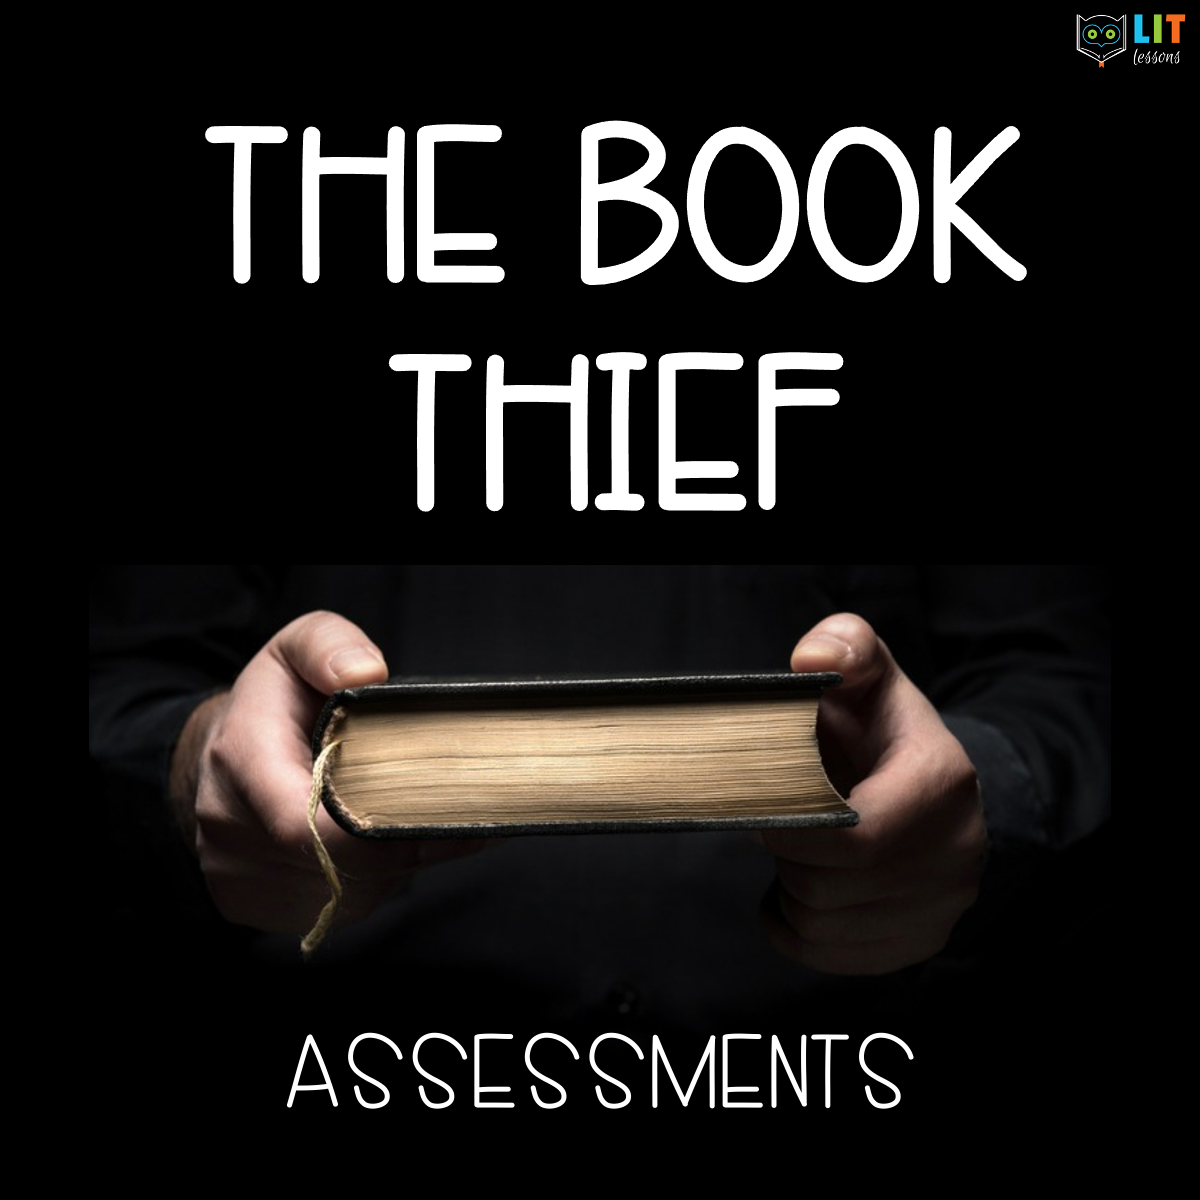 The Book Thief Assessments